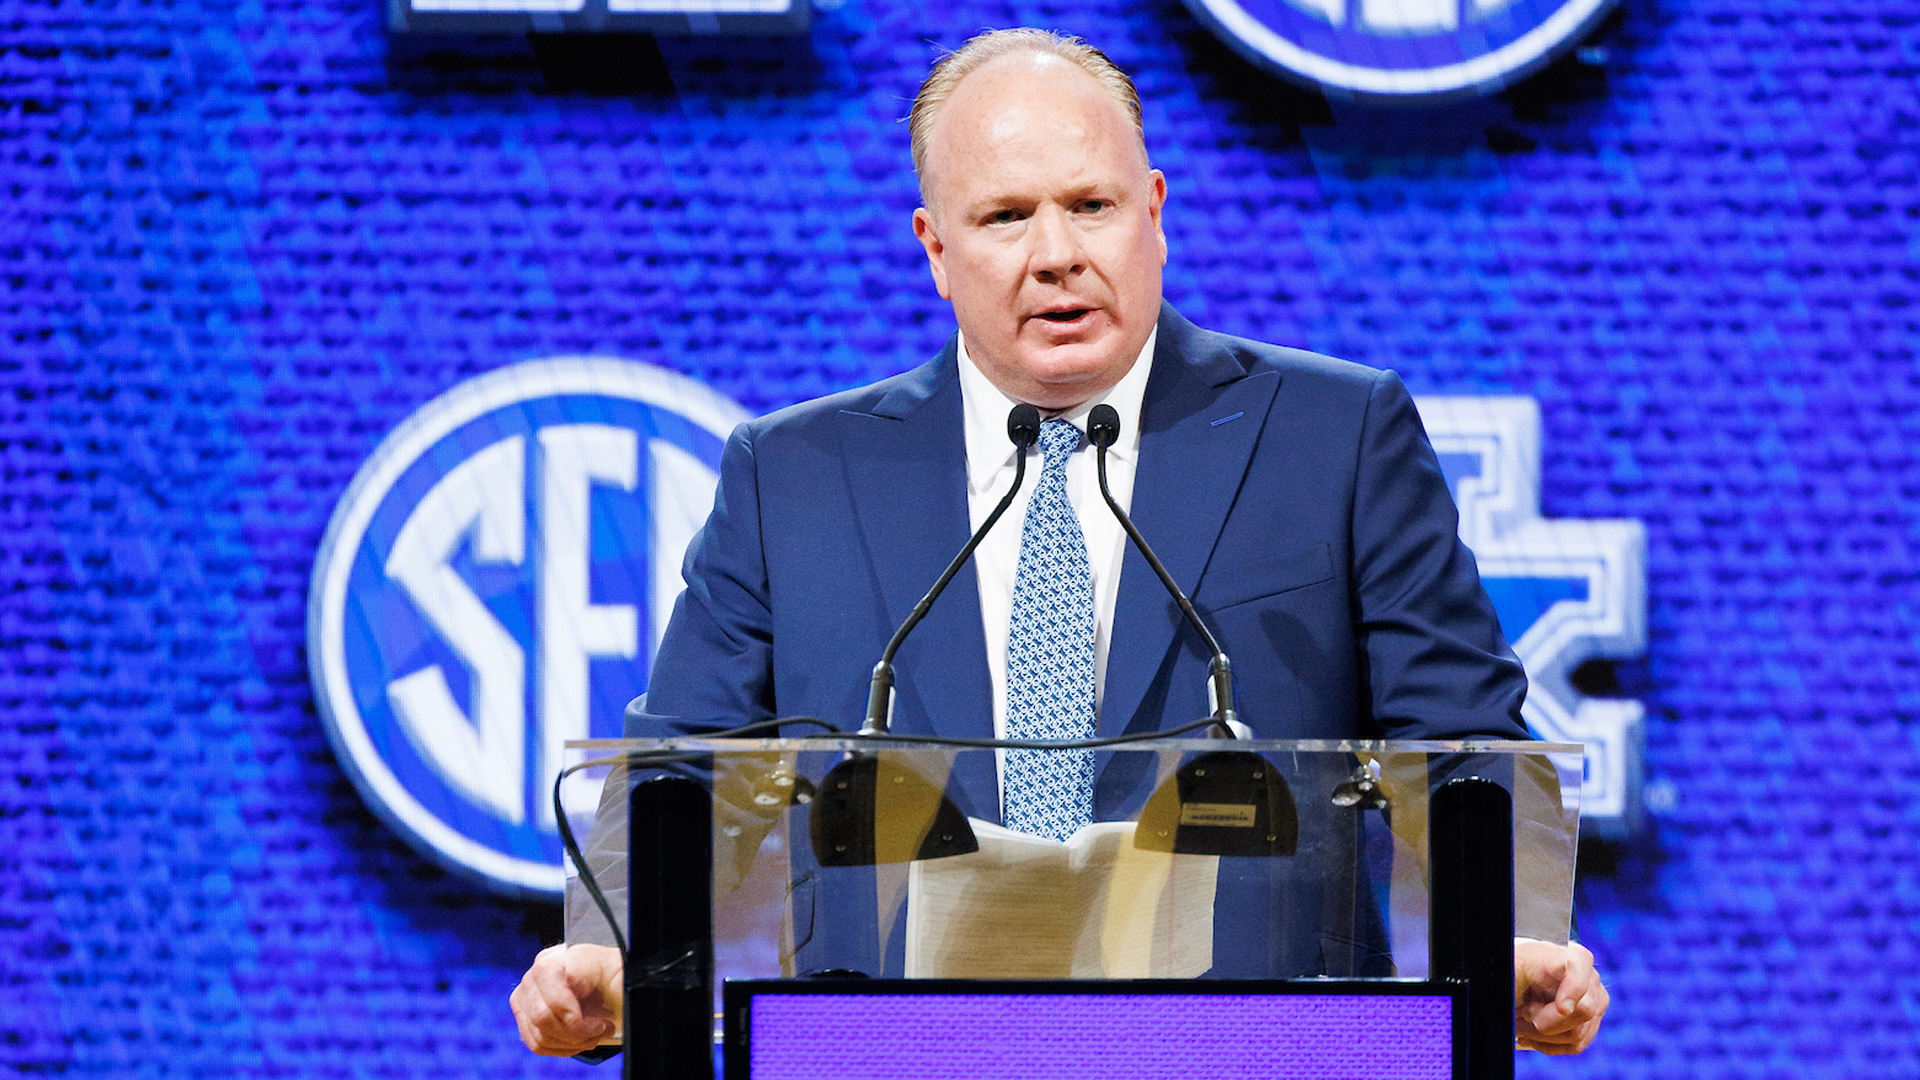 The UK HealthCare Mark Stoops Call-In Show Returns Aug. 28